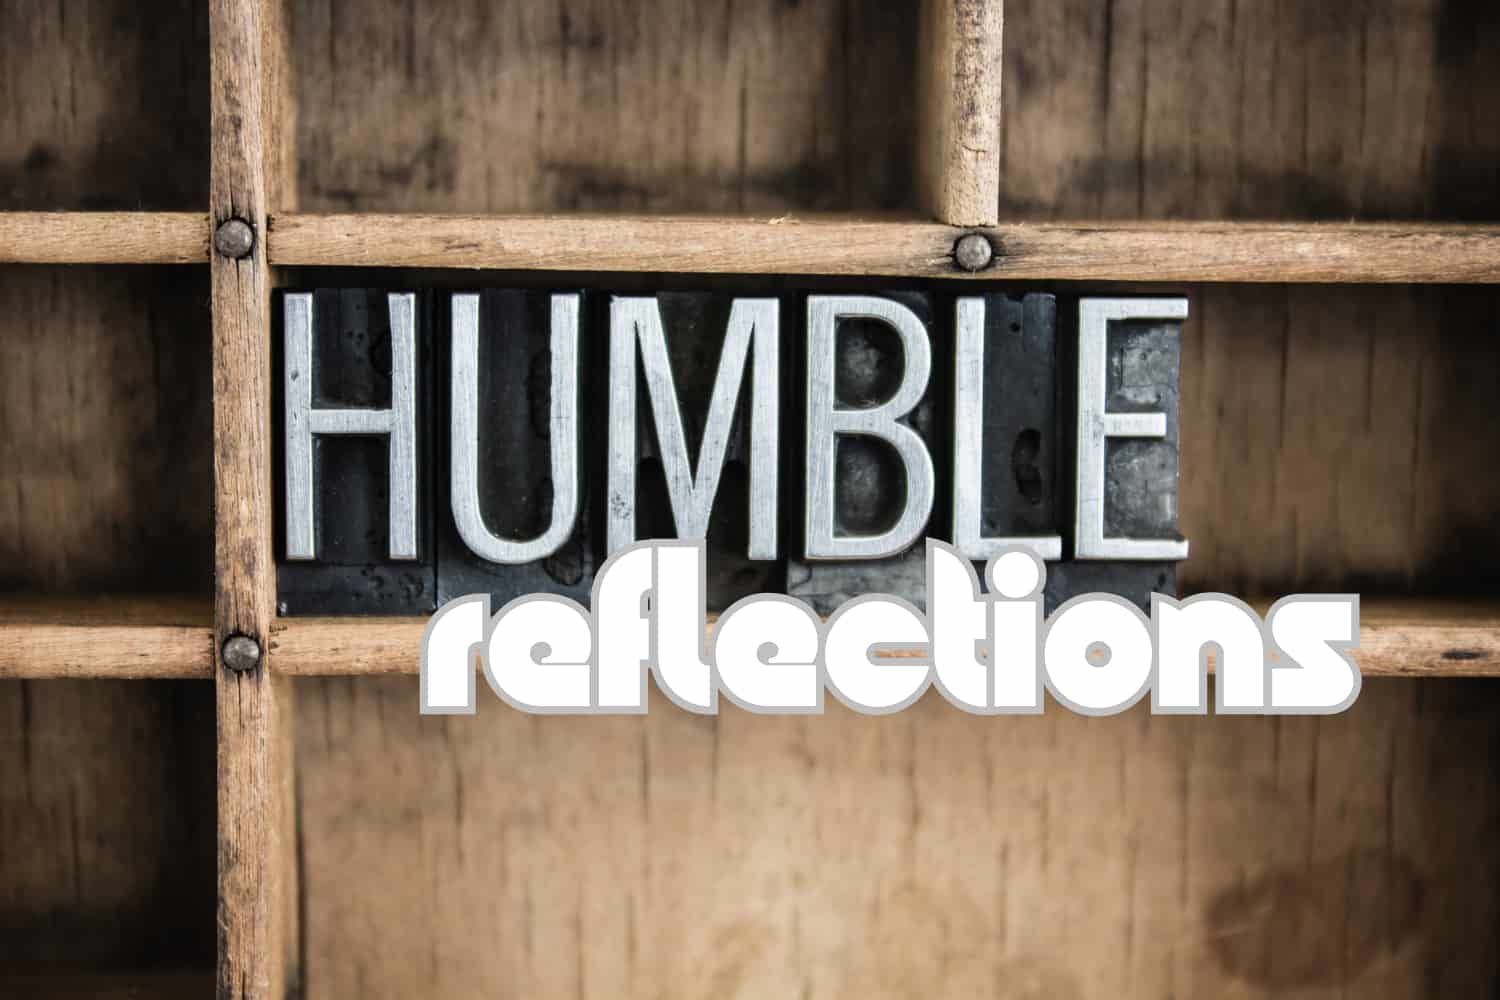 Object%20lesson%20-%20NT%20The%20pharisee%20and%20the%20tax%20collector%20-%20Humble%20reflections-5792de36 Humility / pride